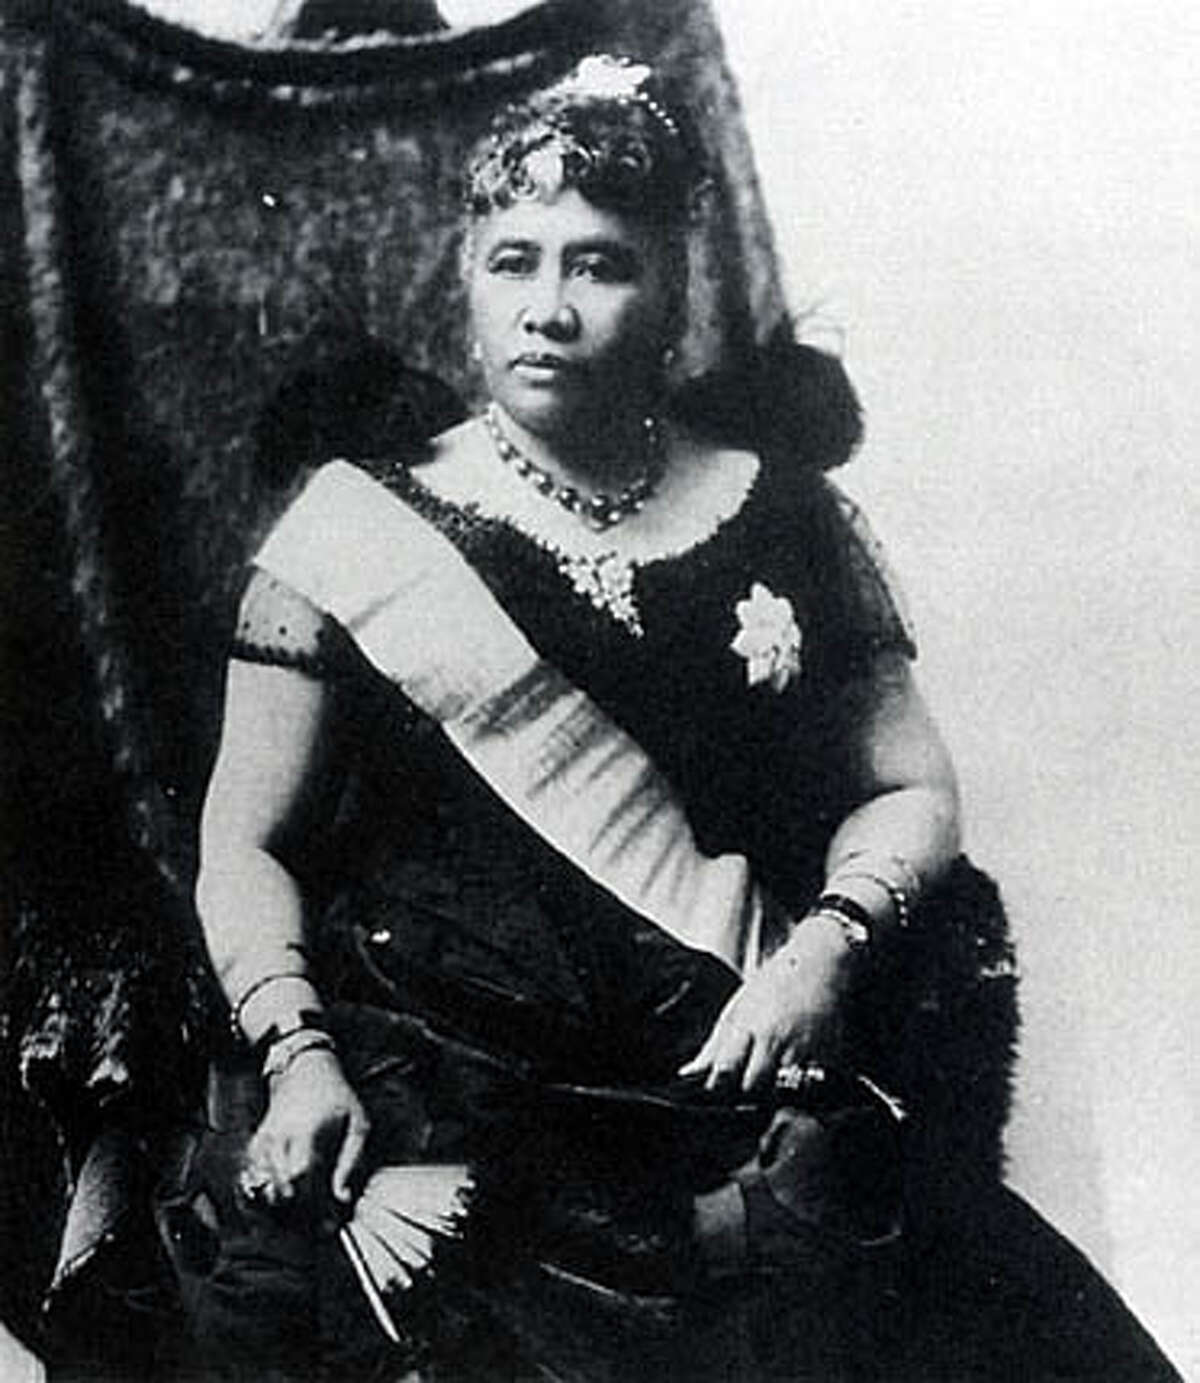 Queen Liliuokalani of Hawaii was the first foreign leader to be overthrown with the collaboration of American officials. She was deposed in 1893. Photo from "Overthrow"